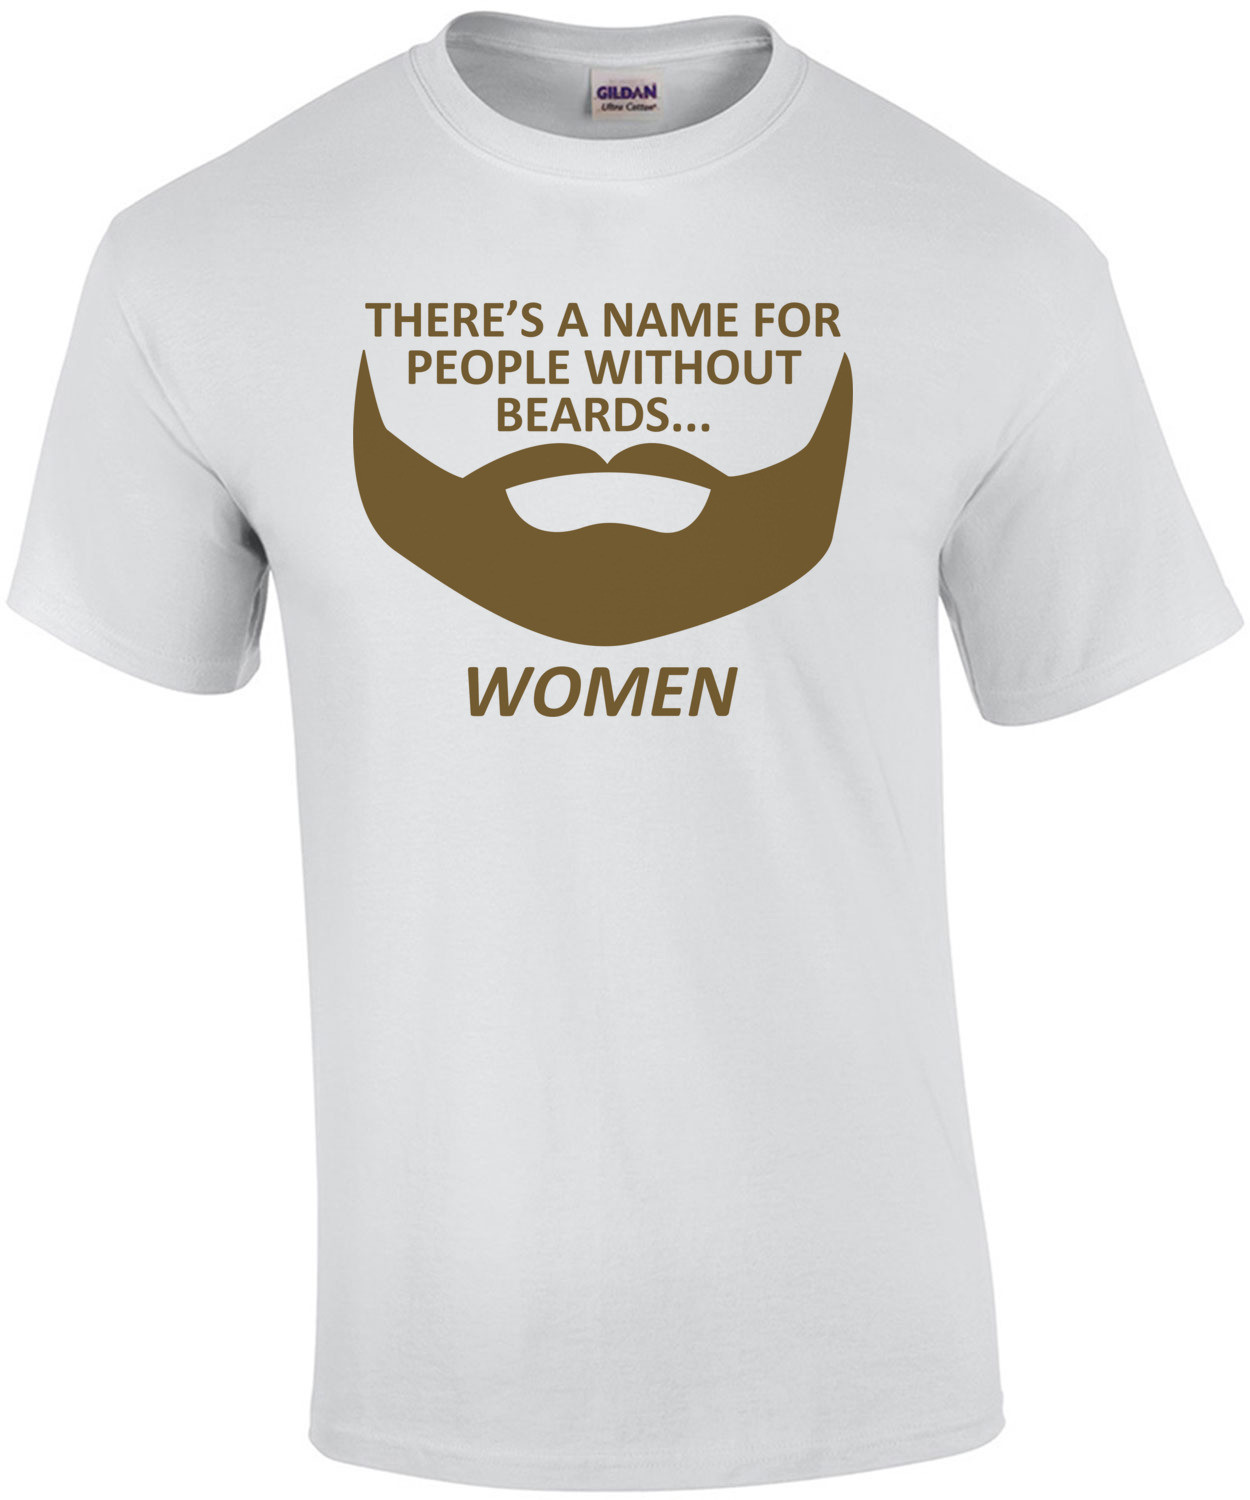 There's A Name For People Without Beards T-Shirt